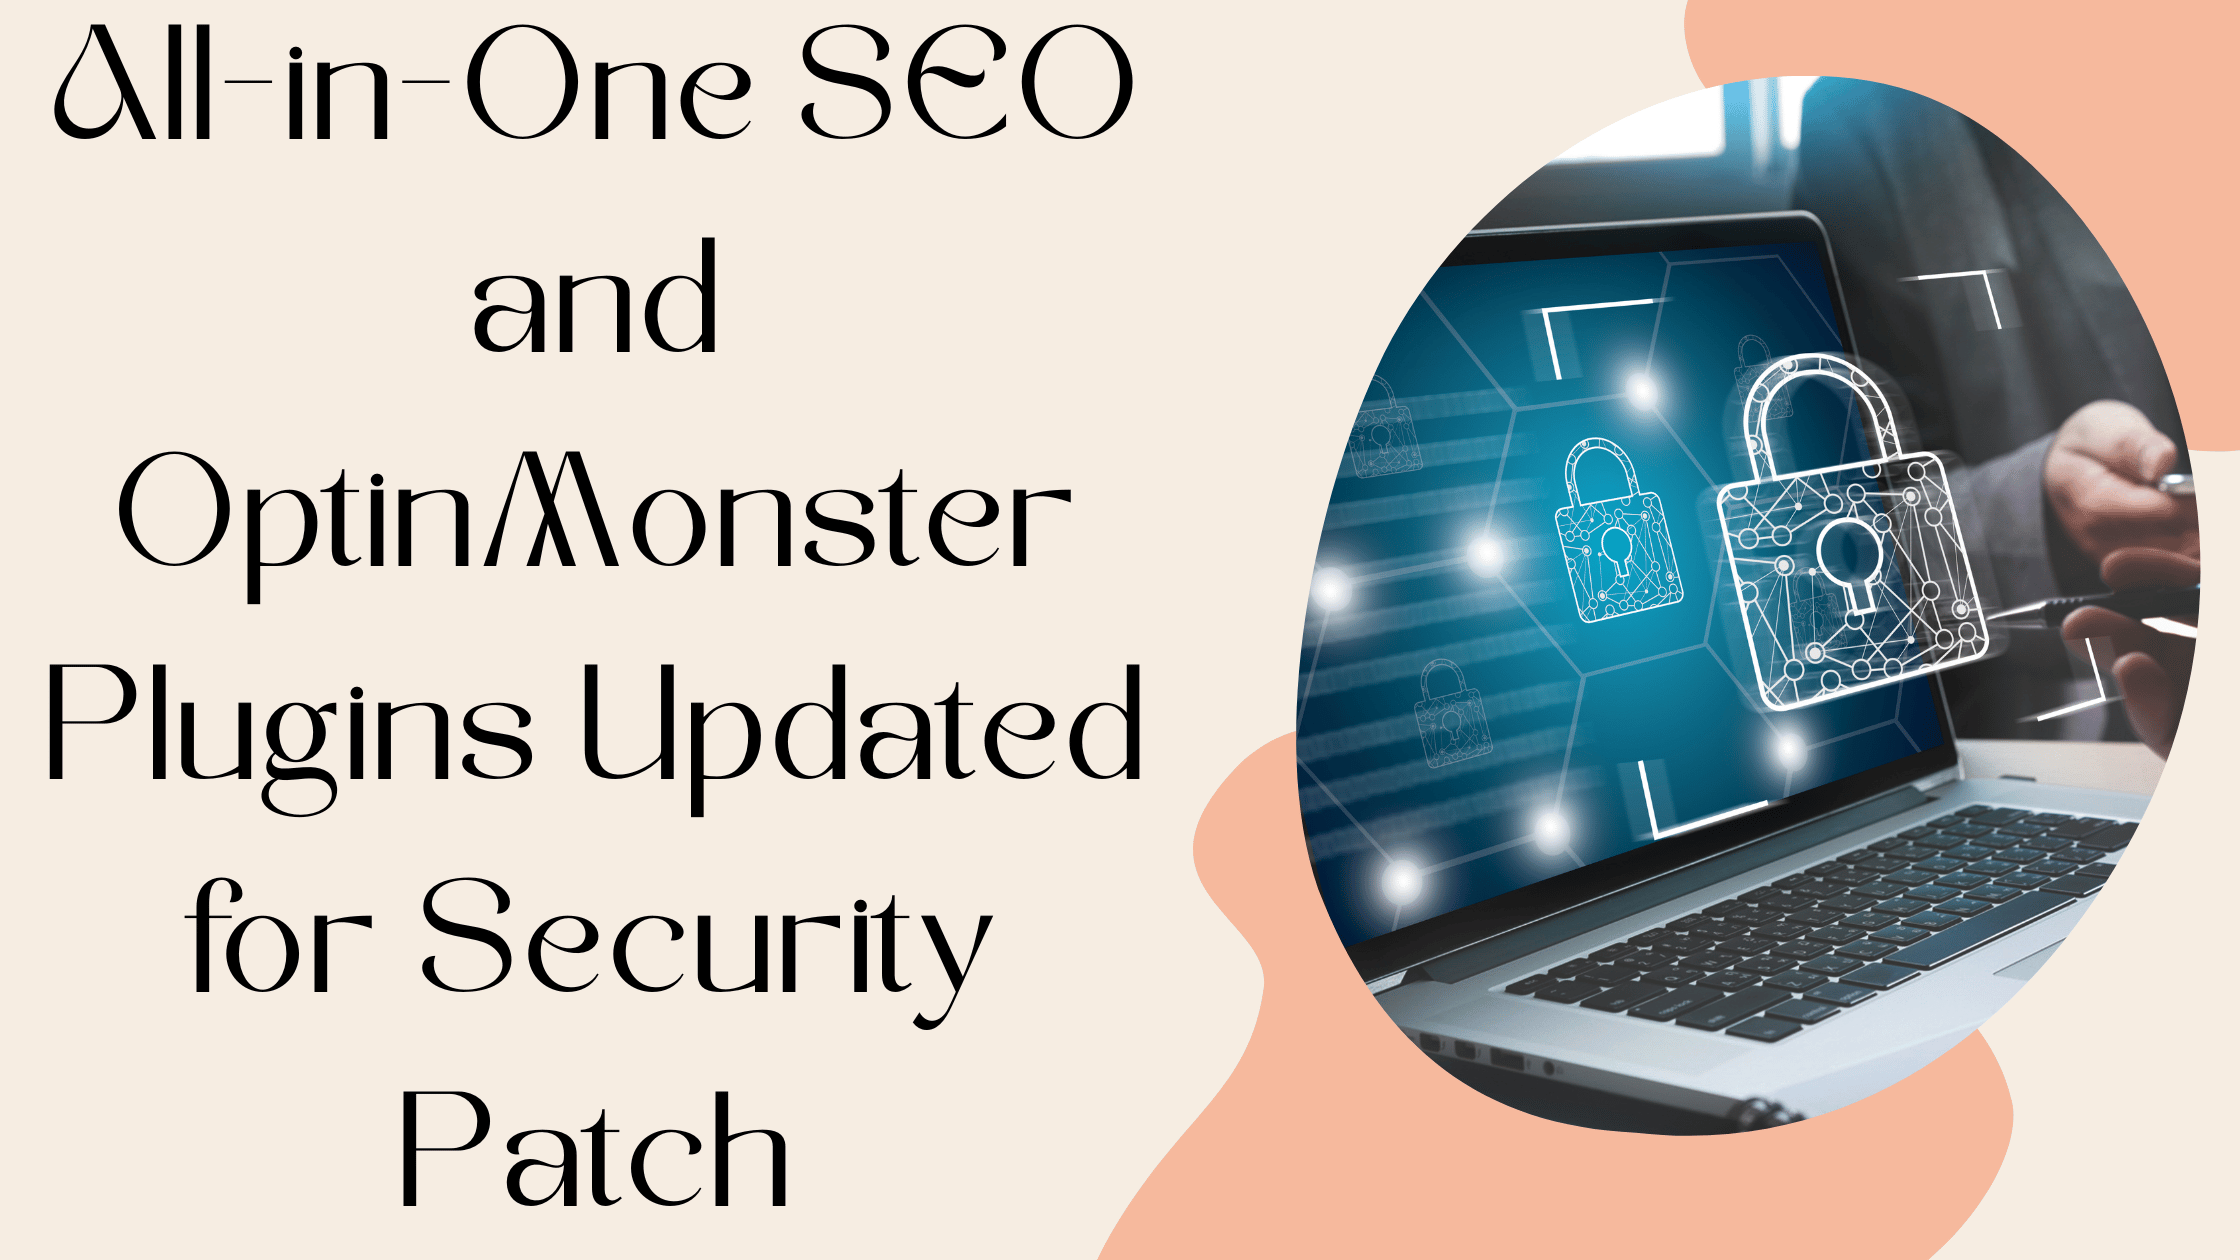 All-in-One SEO and OptinMonster Plugins Updated for Security Patch